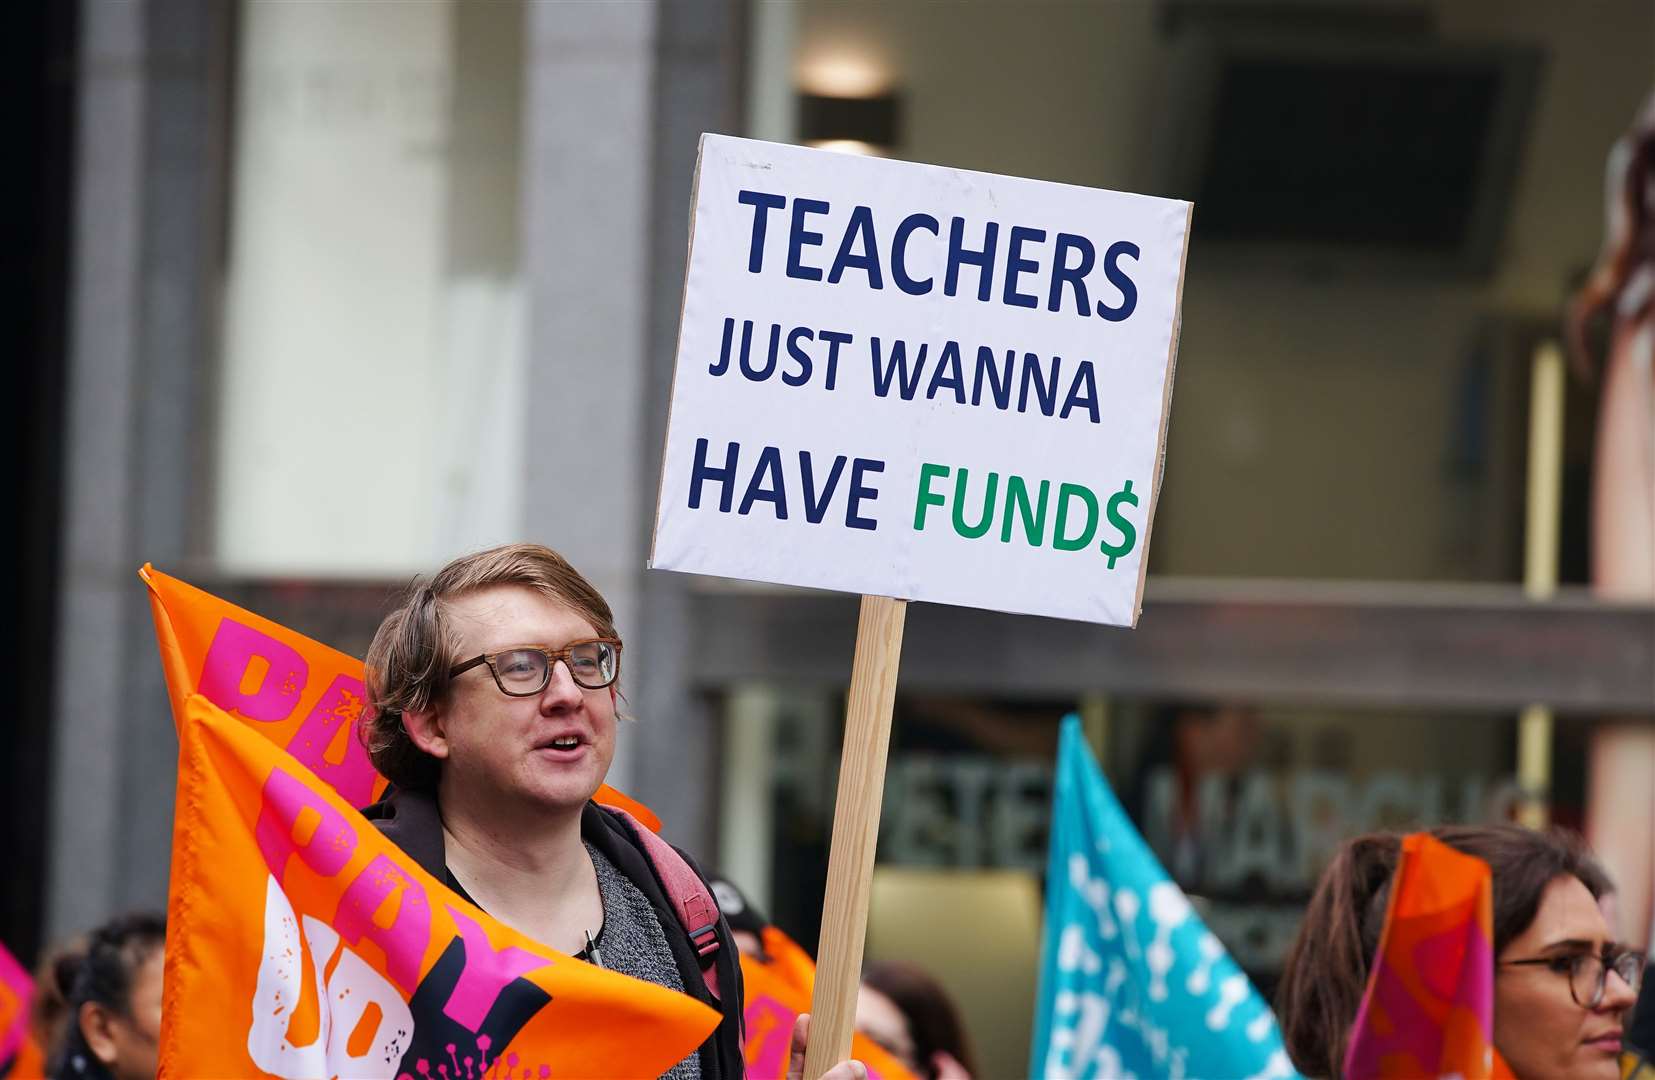 Members of the National Education Union during a rally (Peter Byrne/PA)